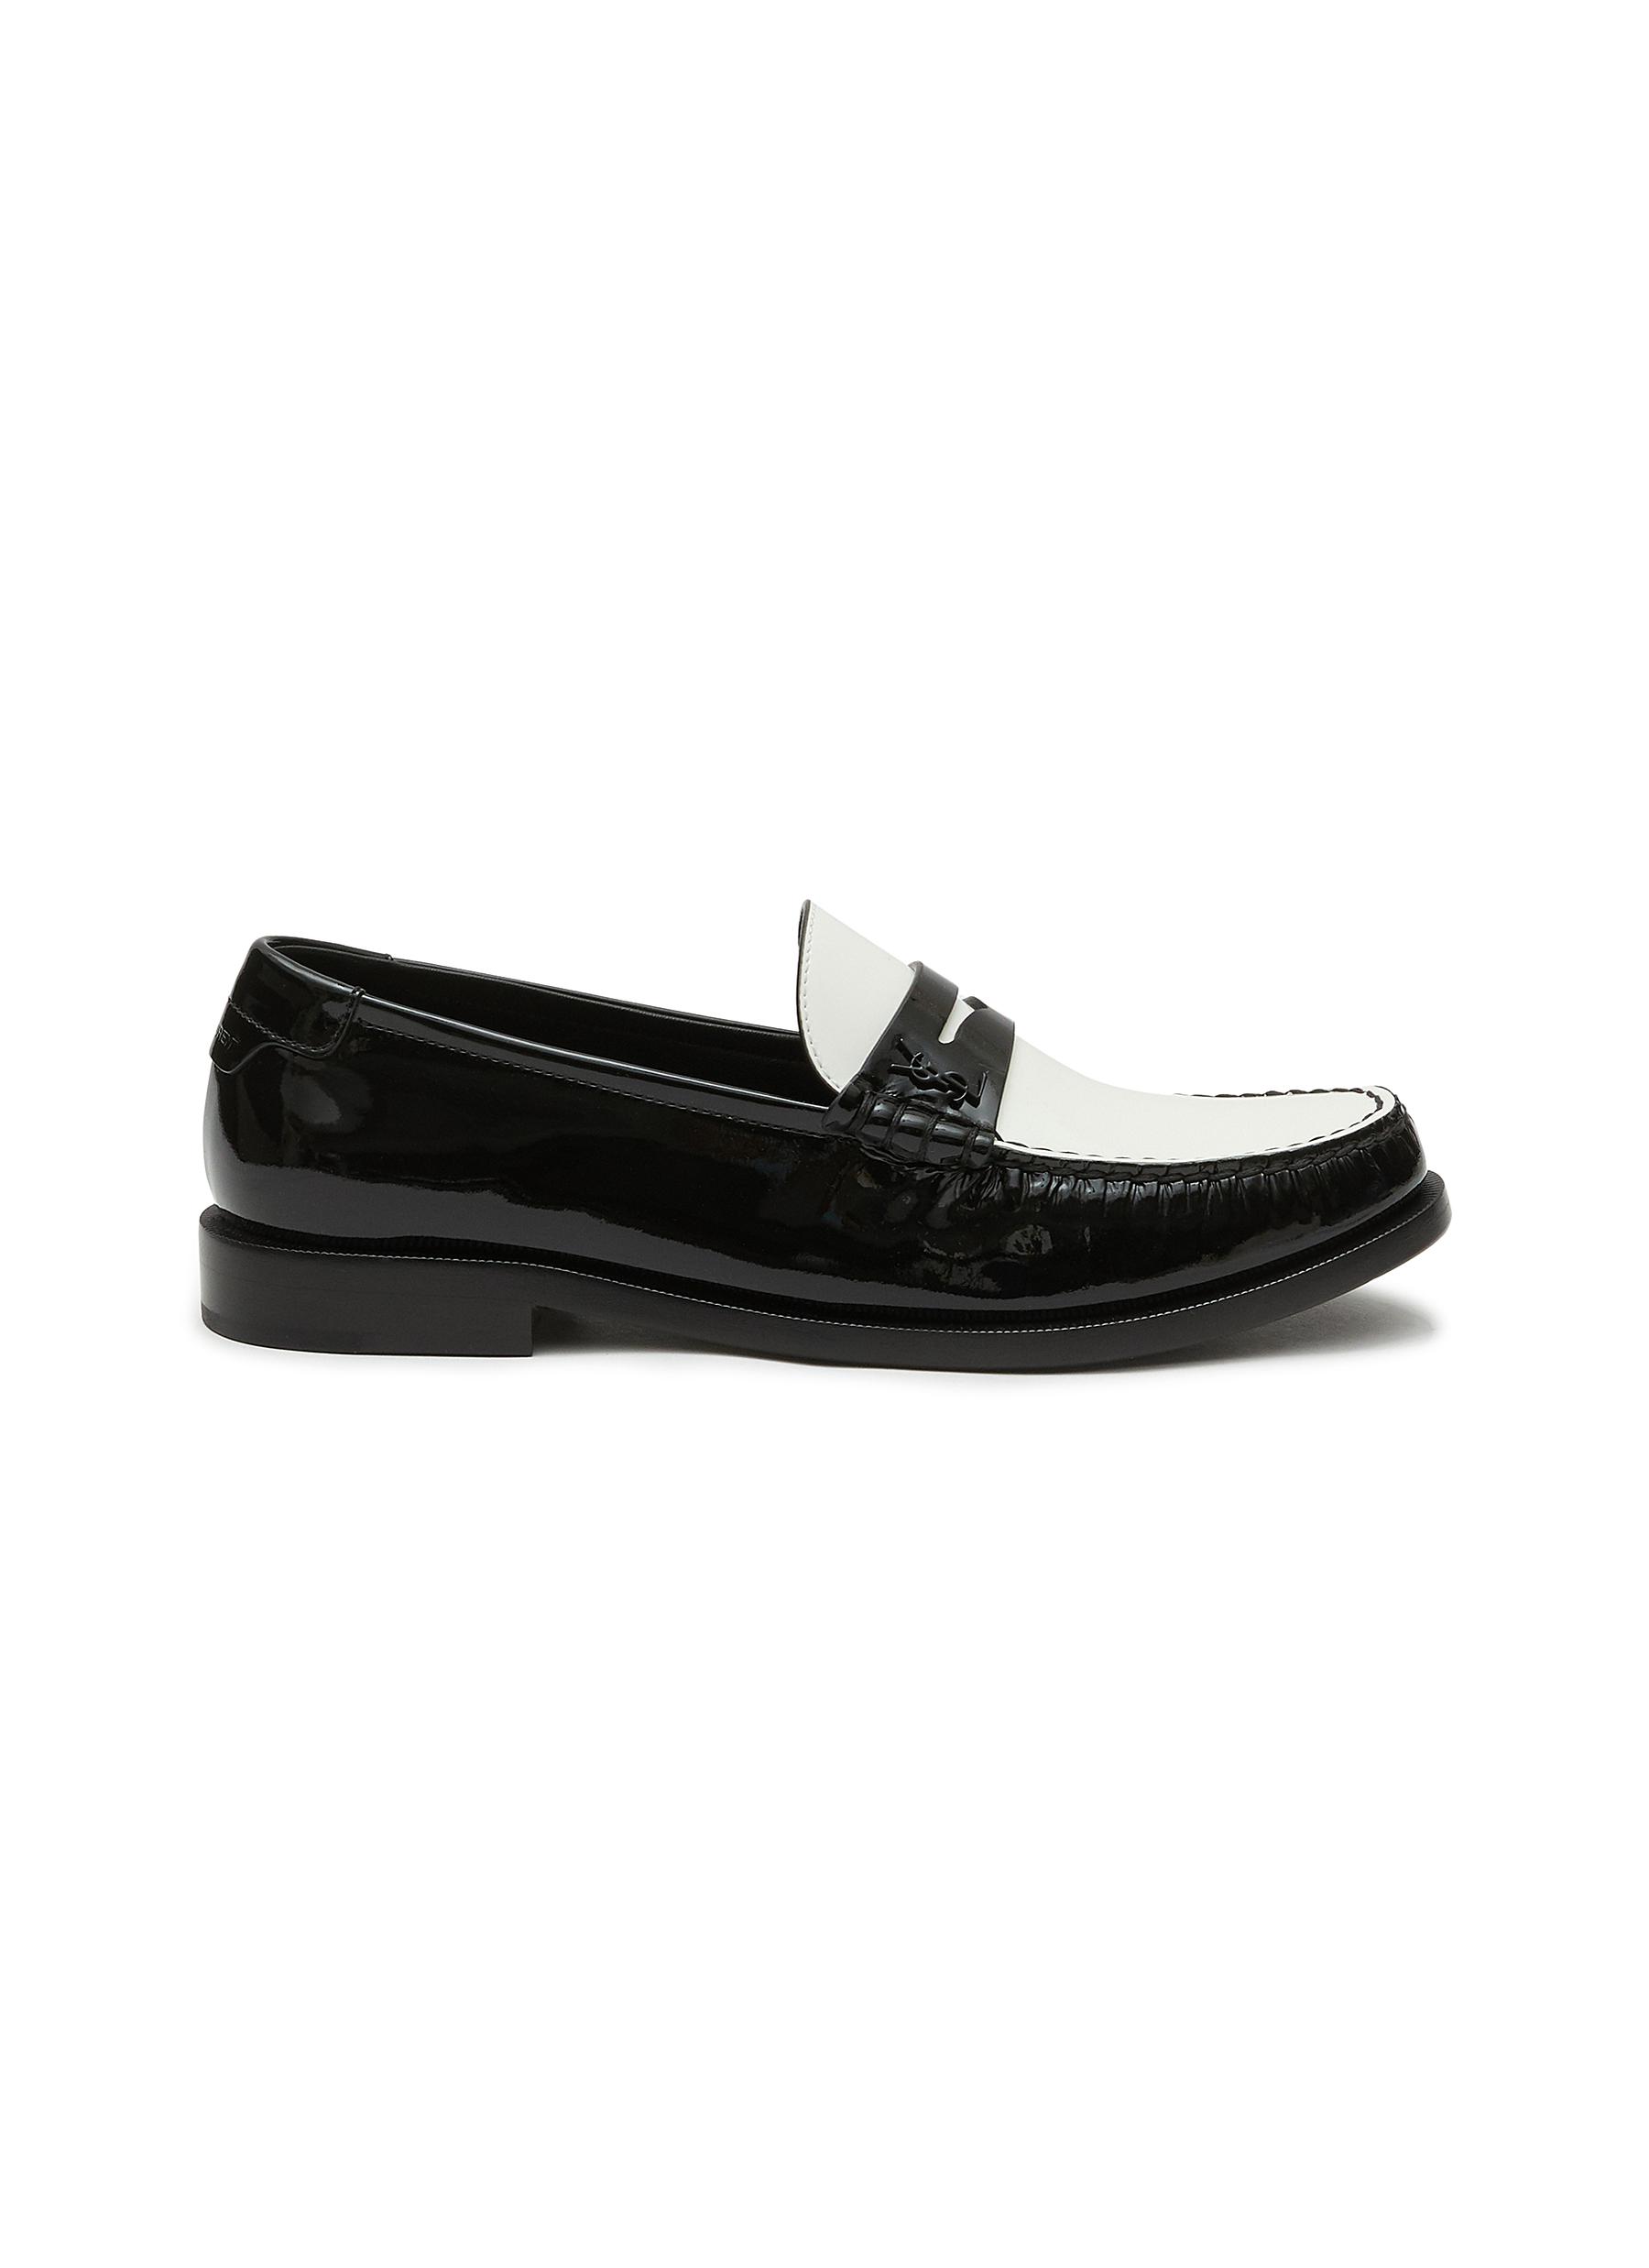 â€˜LE LOAFER 15’ PATENT NAPPA LEATHER LOAFERS